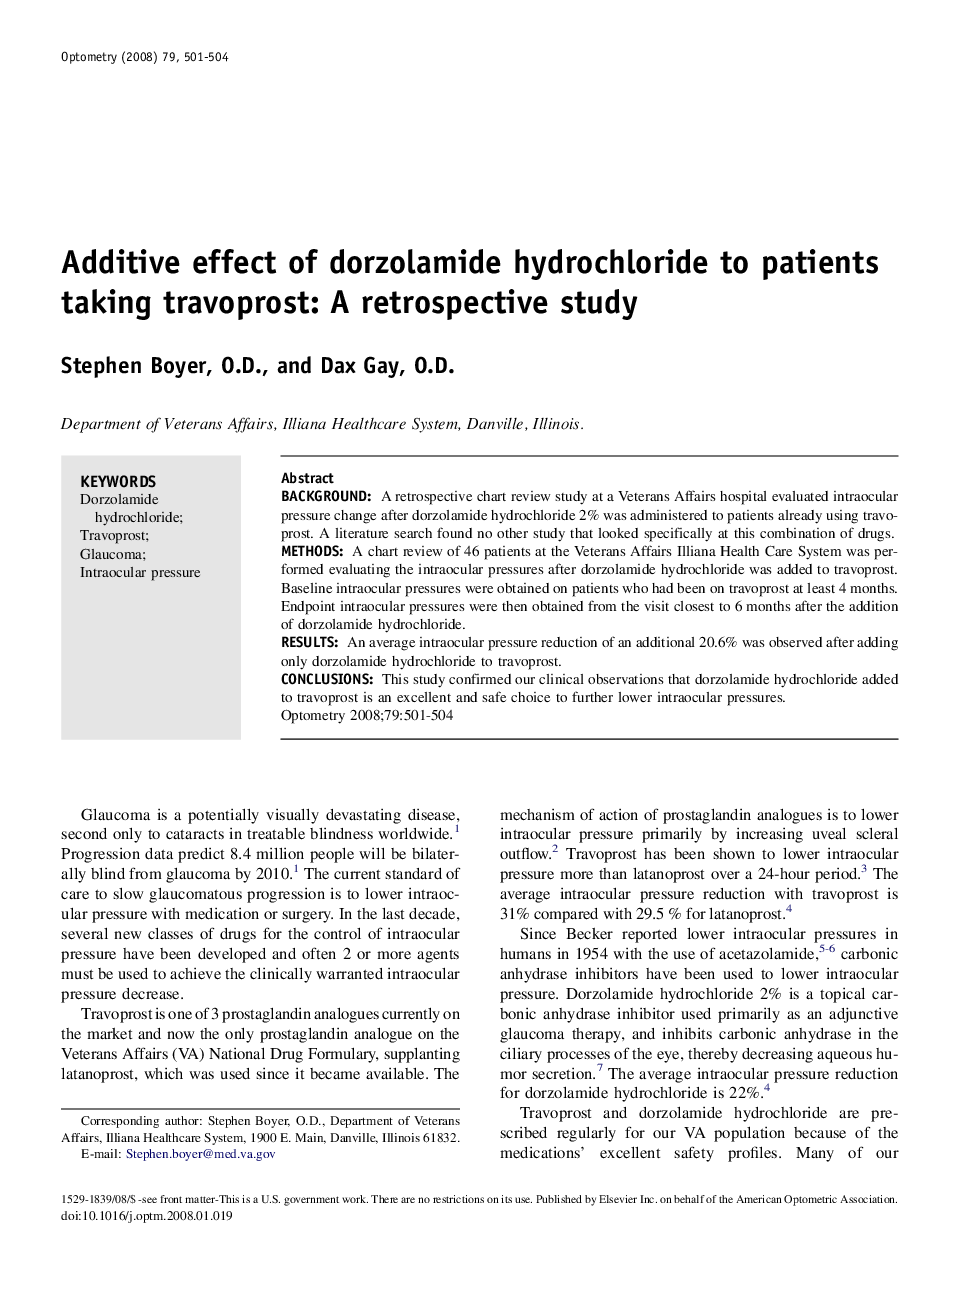 Additive effect of dorzolamide hydrochloride to patients taking travoprost: A retrospective study